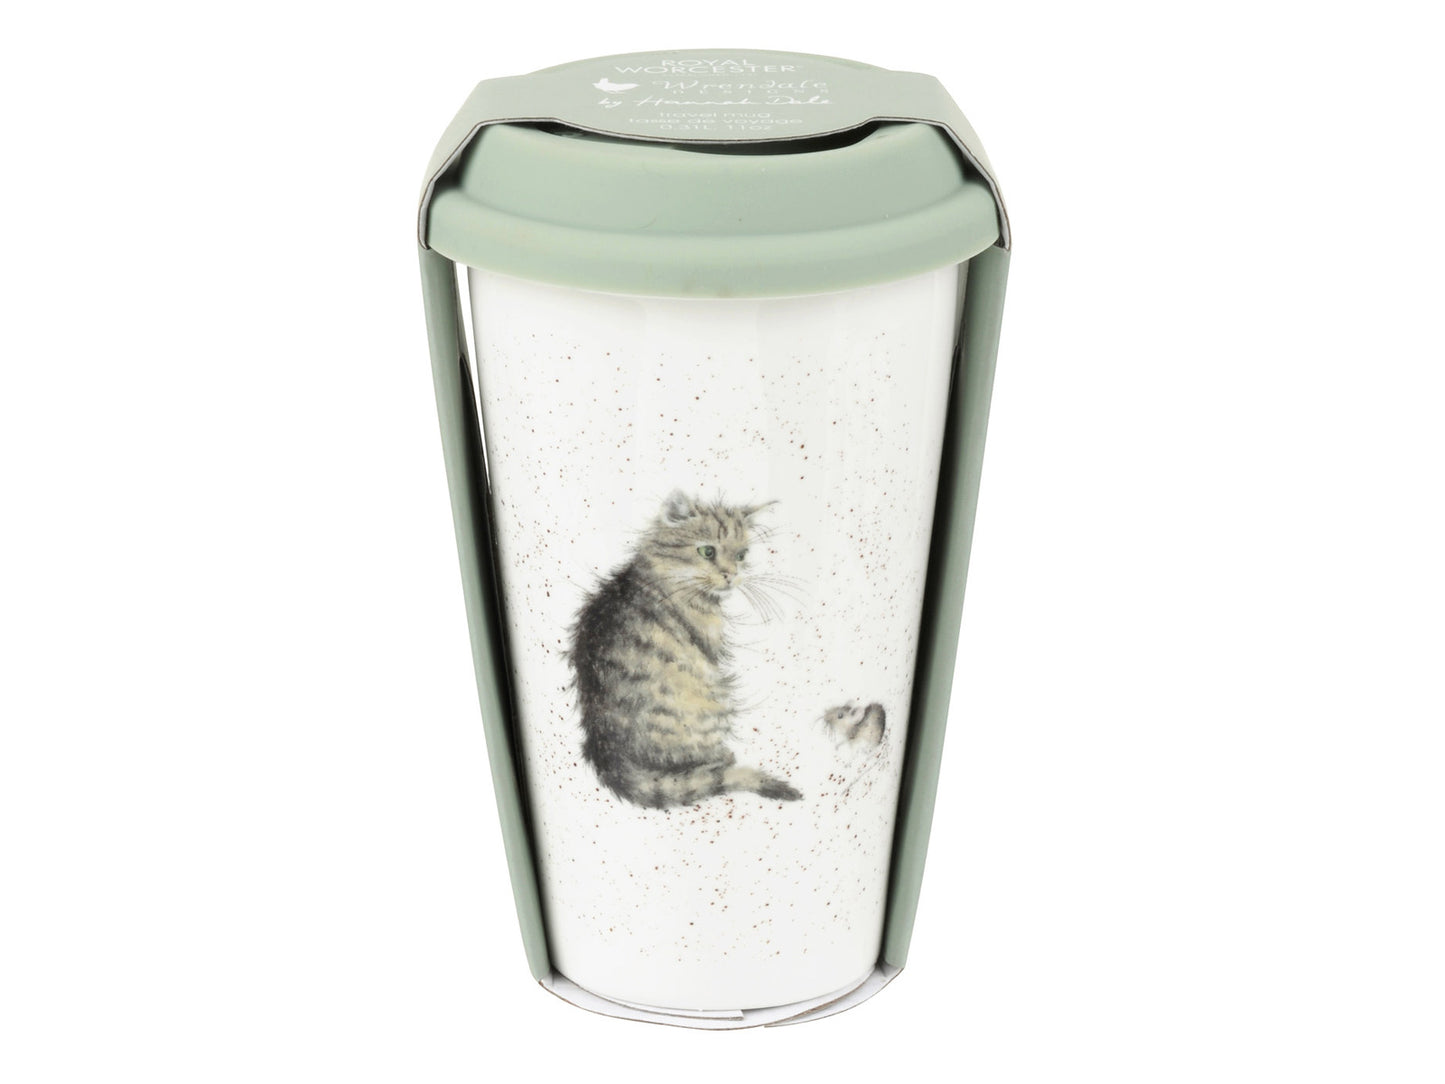 A white china travel mug with a cat and mouse looking at each other on the front with a green lid